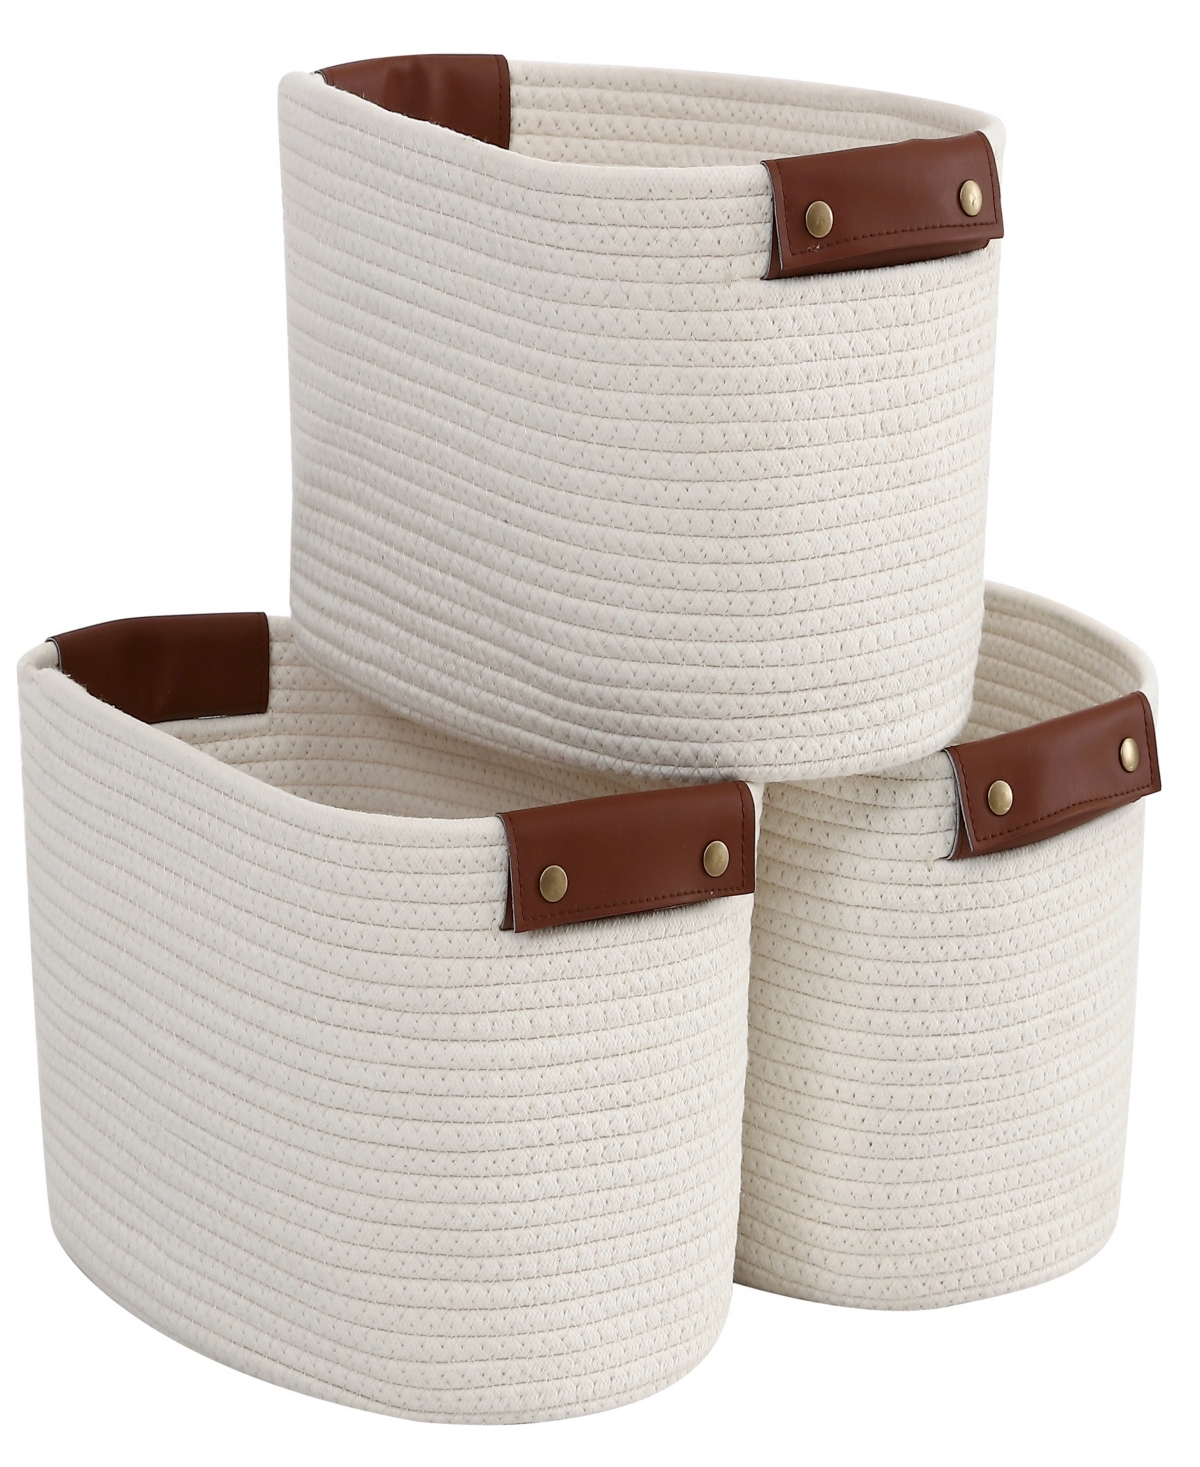 Ornavo Home 3 Pack Woven Cotton Rope Shelf Storage Basket With Leather Handles In Cream